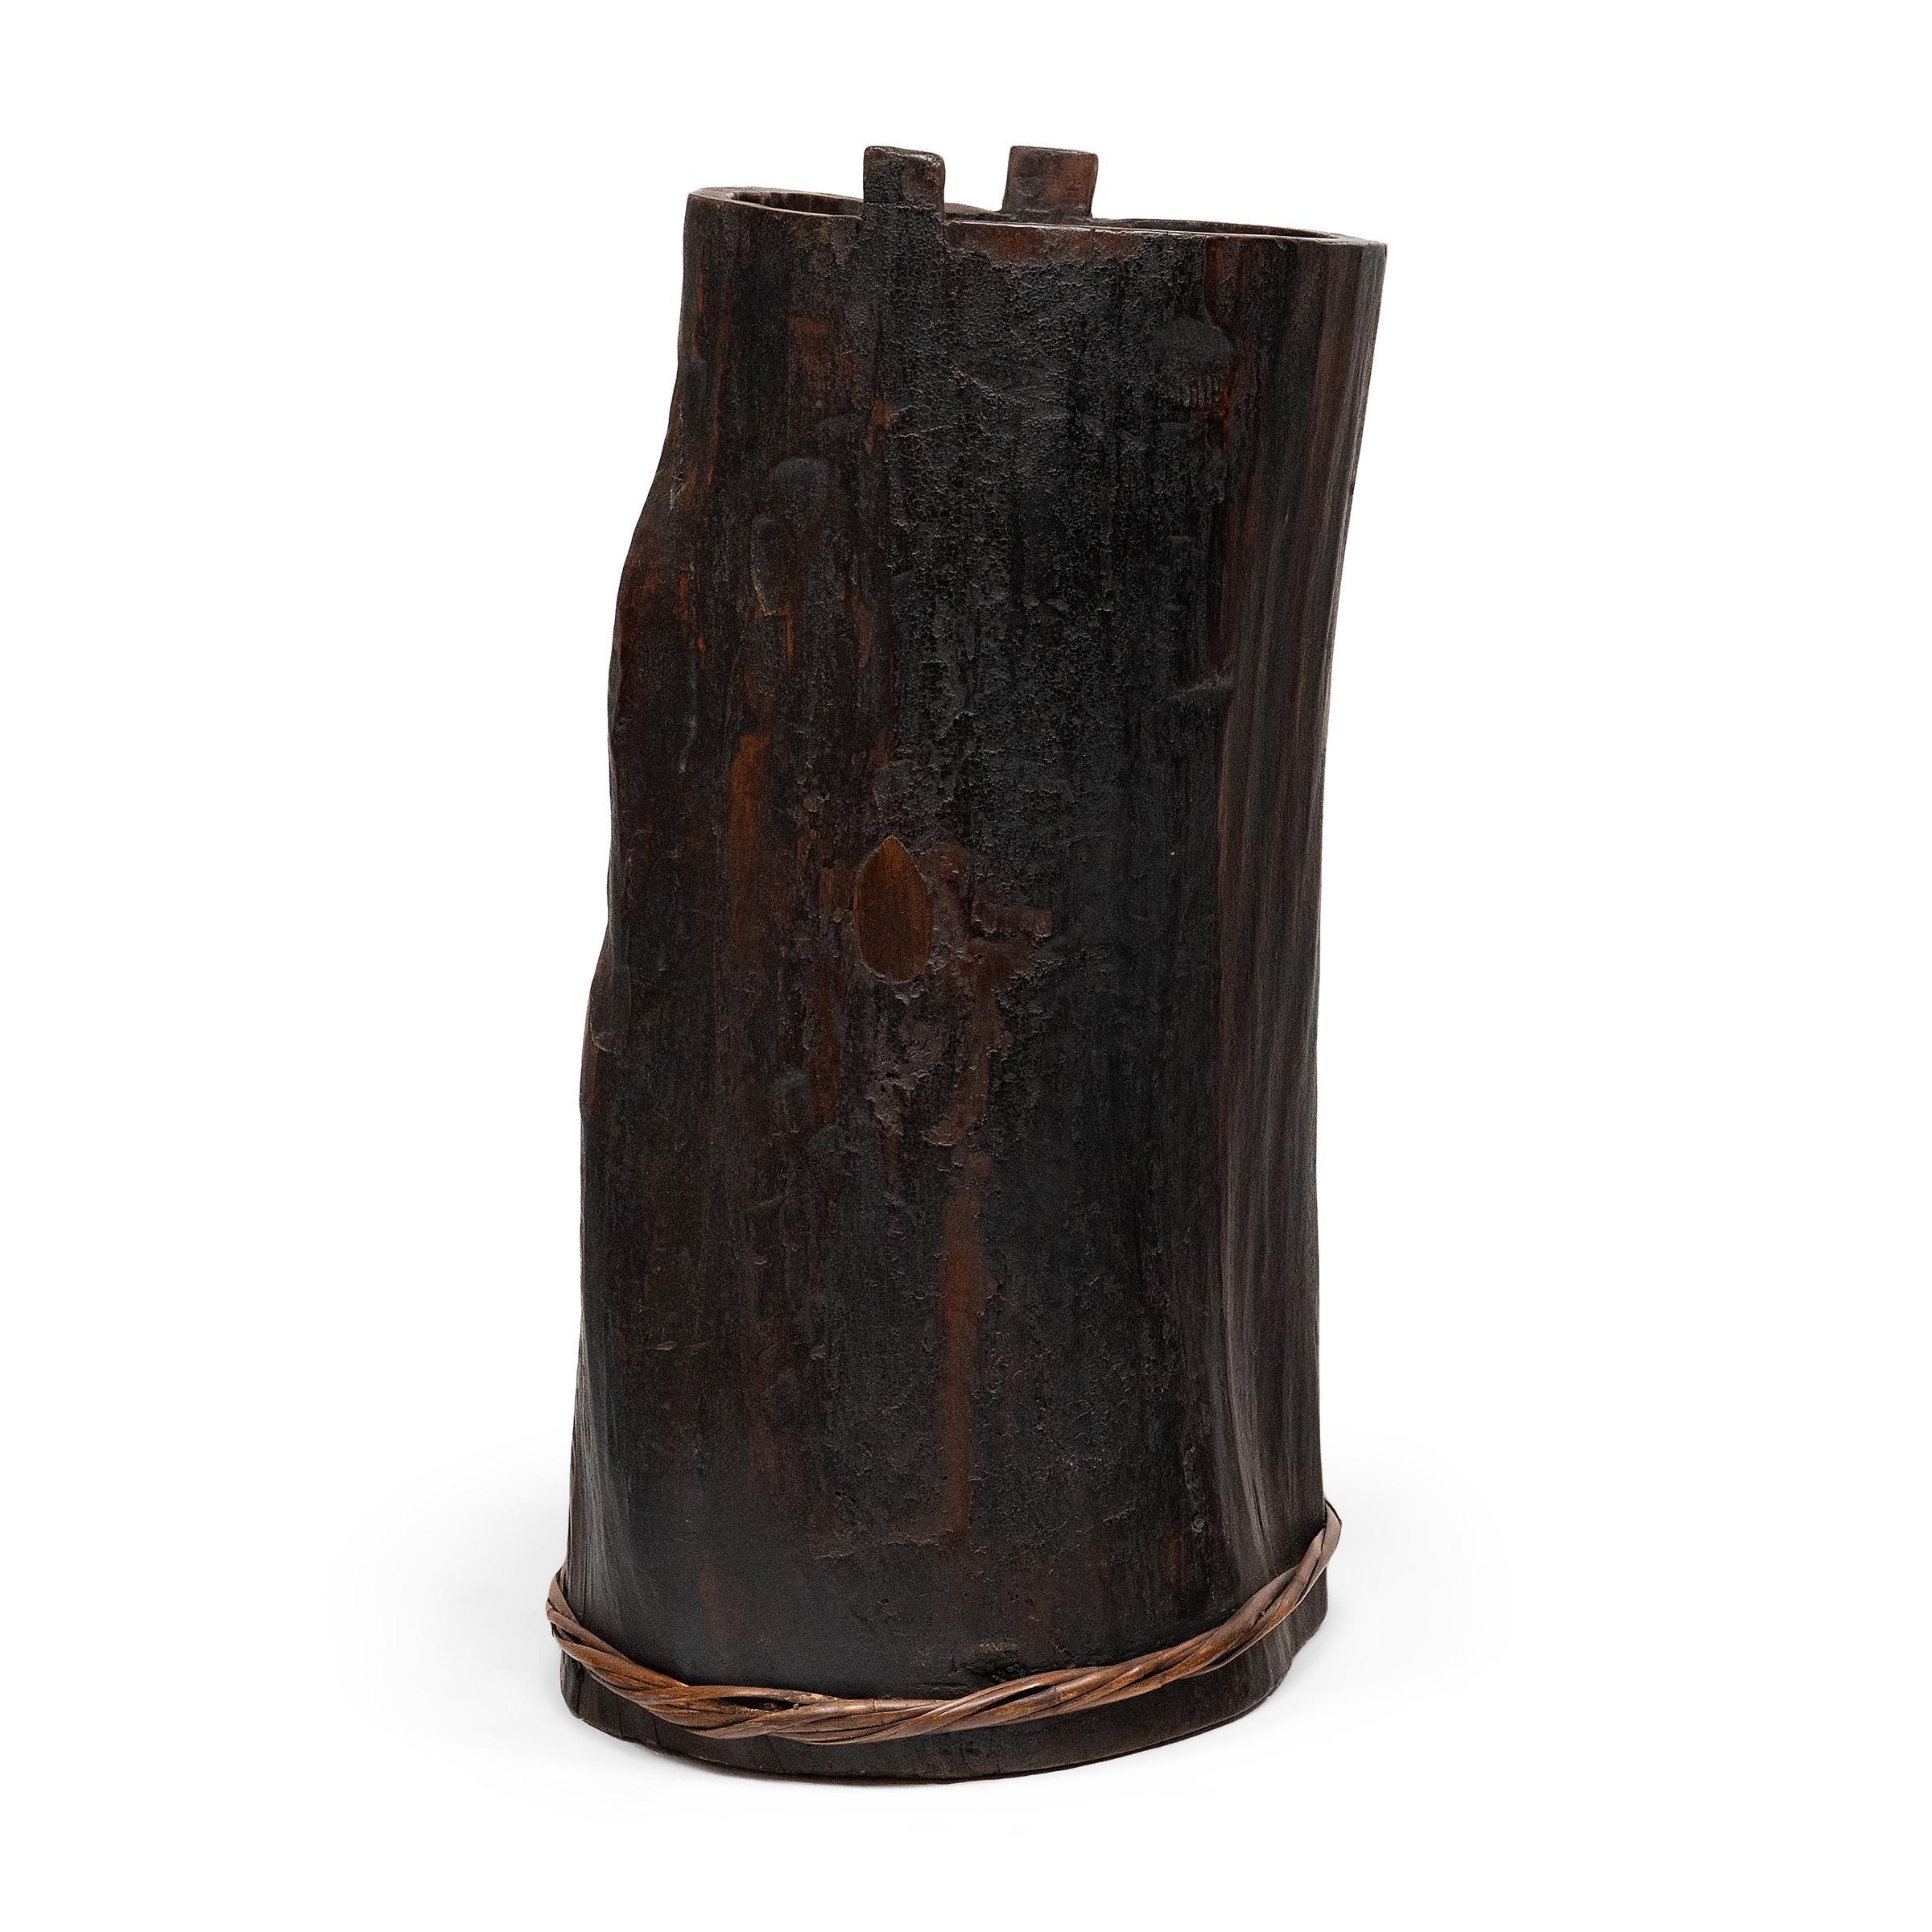 This hand-crafted wooden container dates to the mid-19th century and was likely used to store various foods or household items. Darkened by a rich patina, the container is elegantly constructed from a single block of wood with thin stripes wrapped